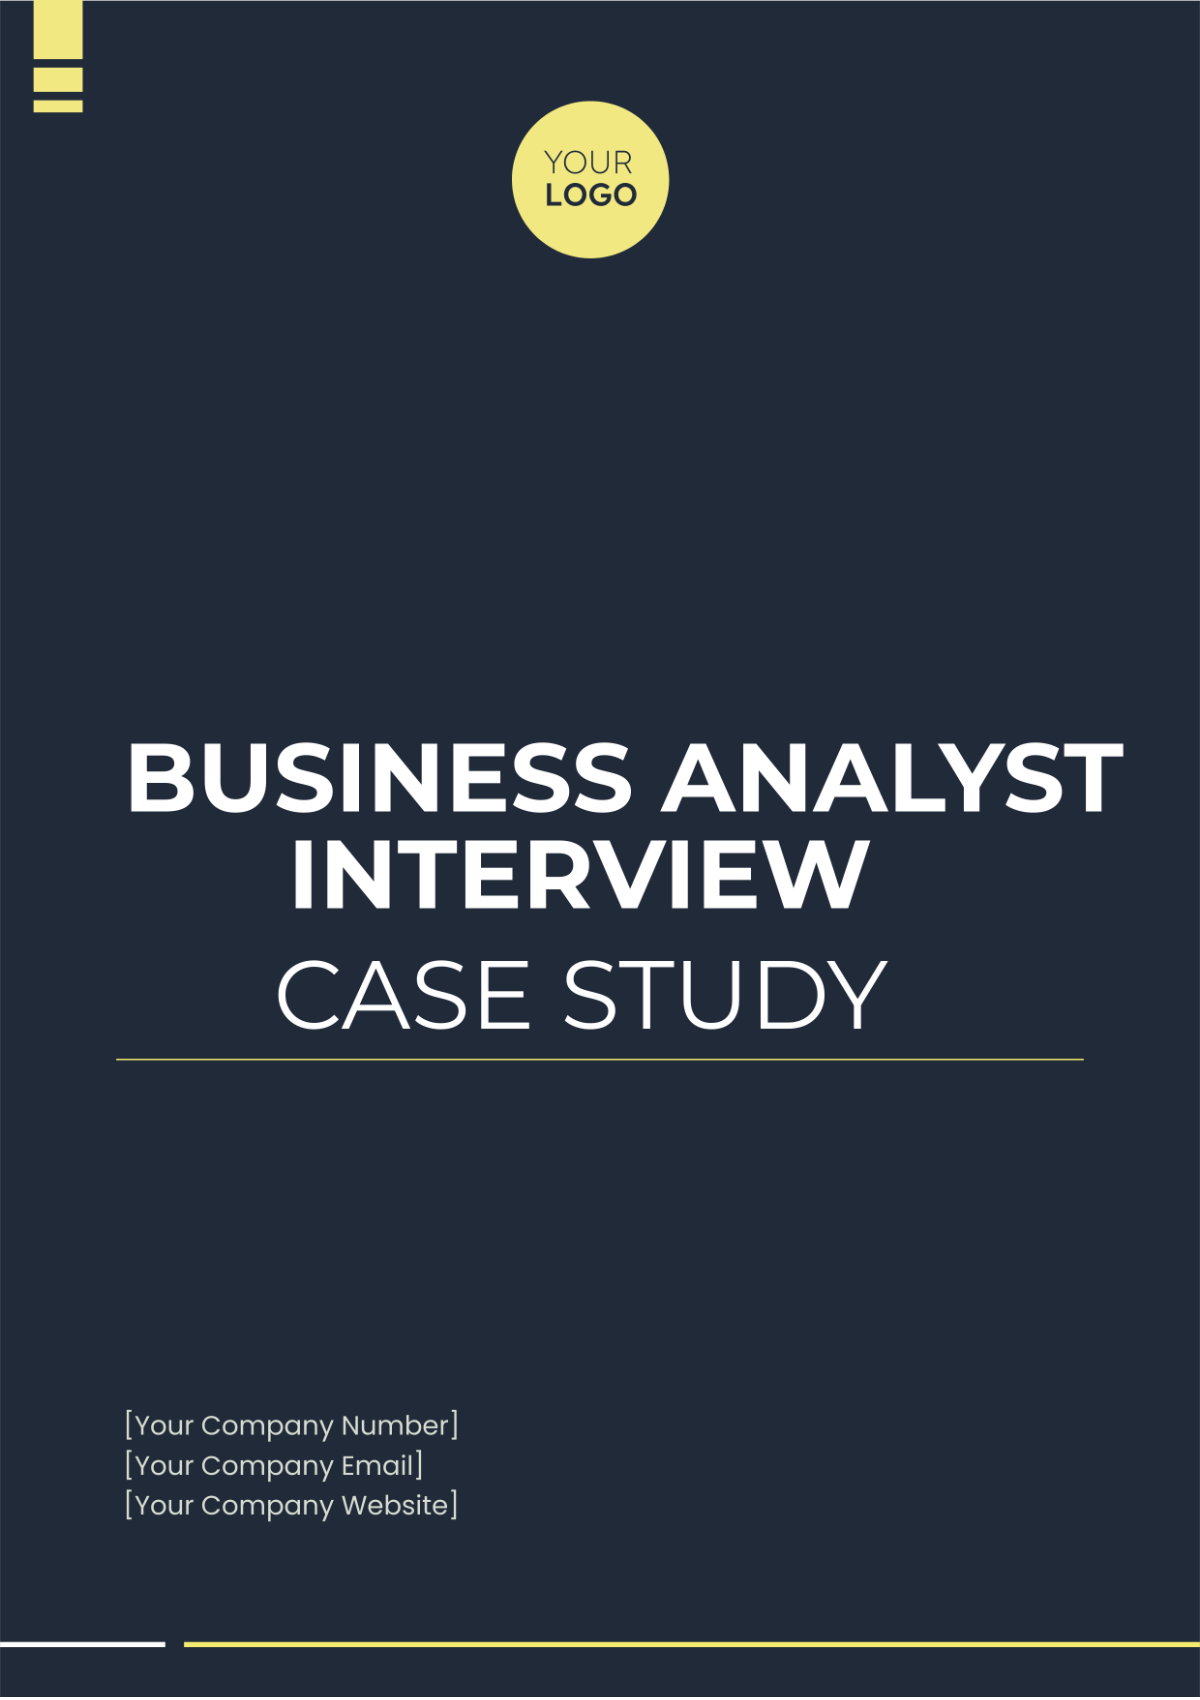 Business Analyst Interview Case Study Template